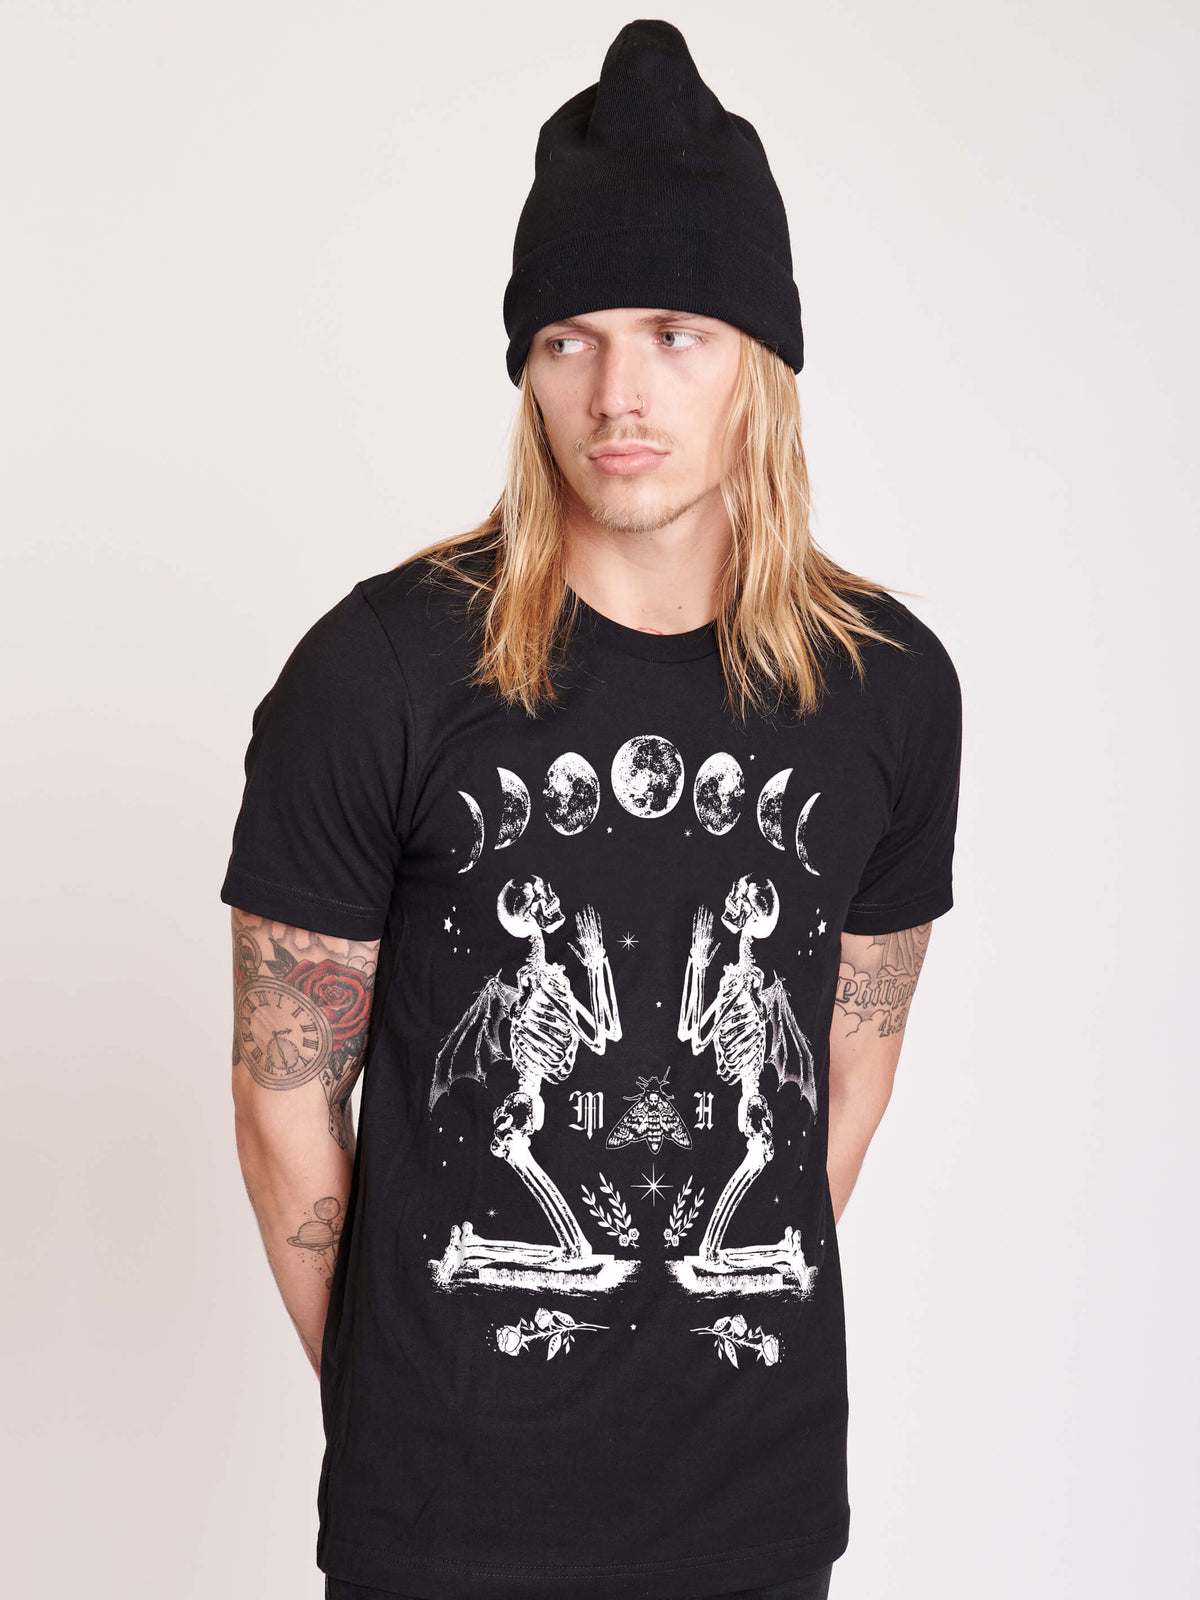 black t-shirt with moon phase and skeleton print.